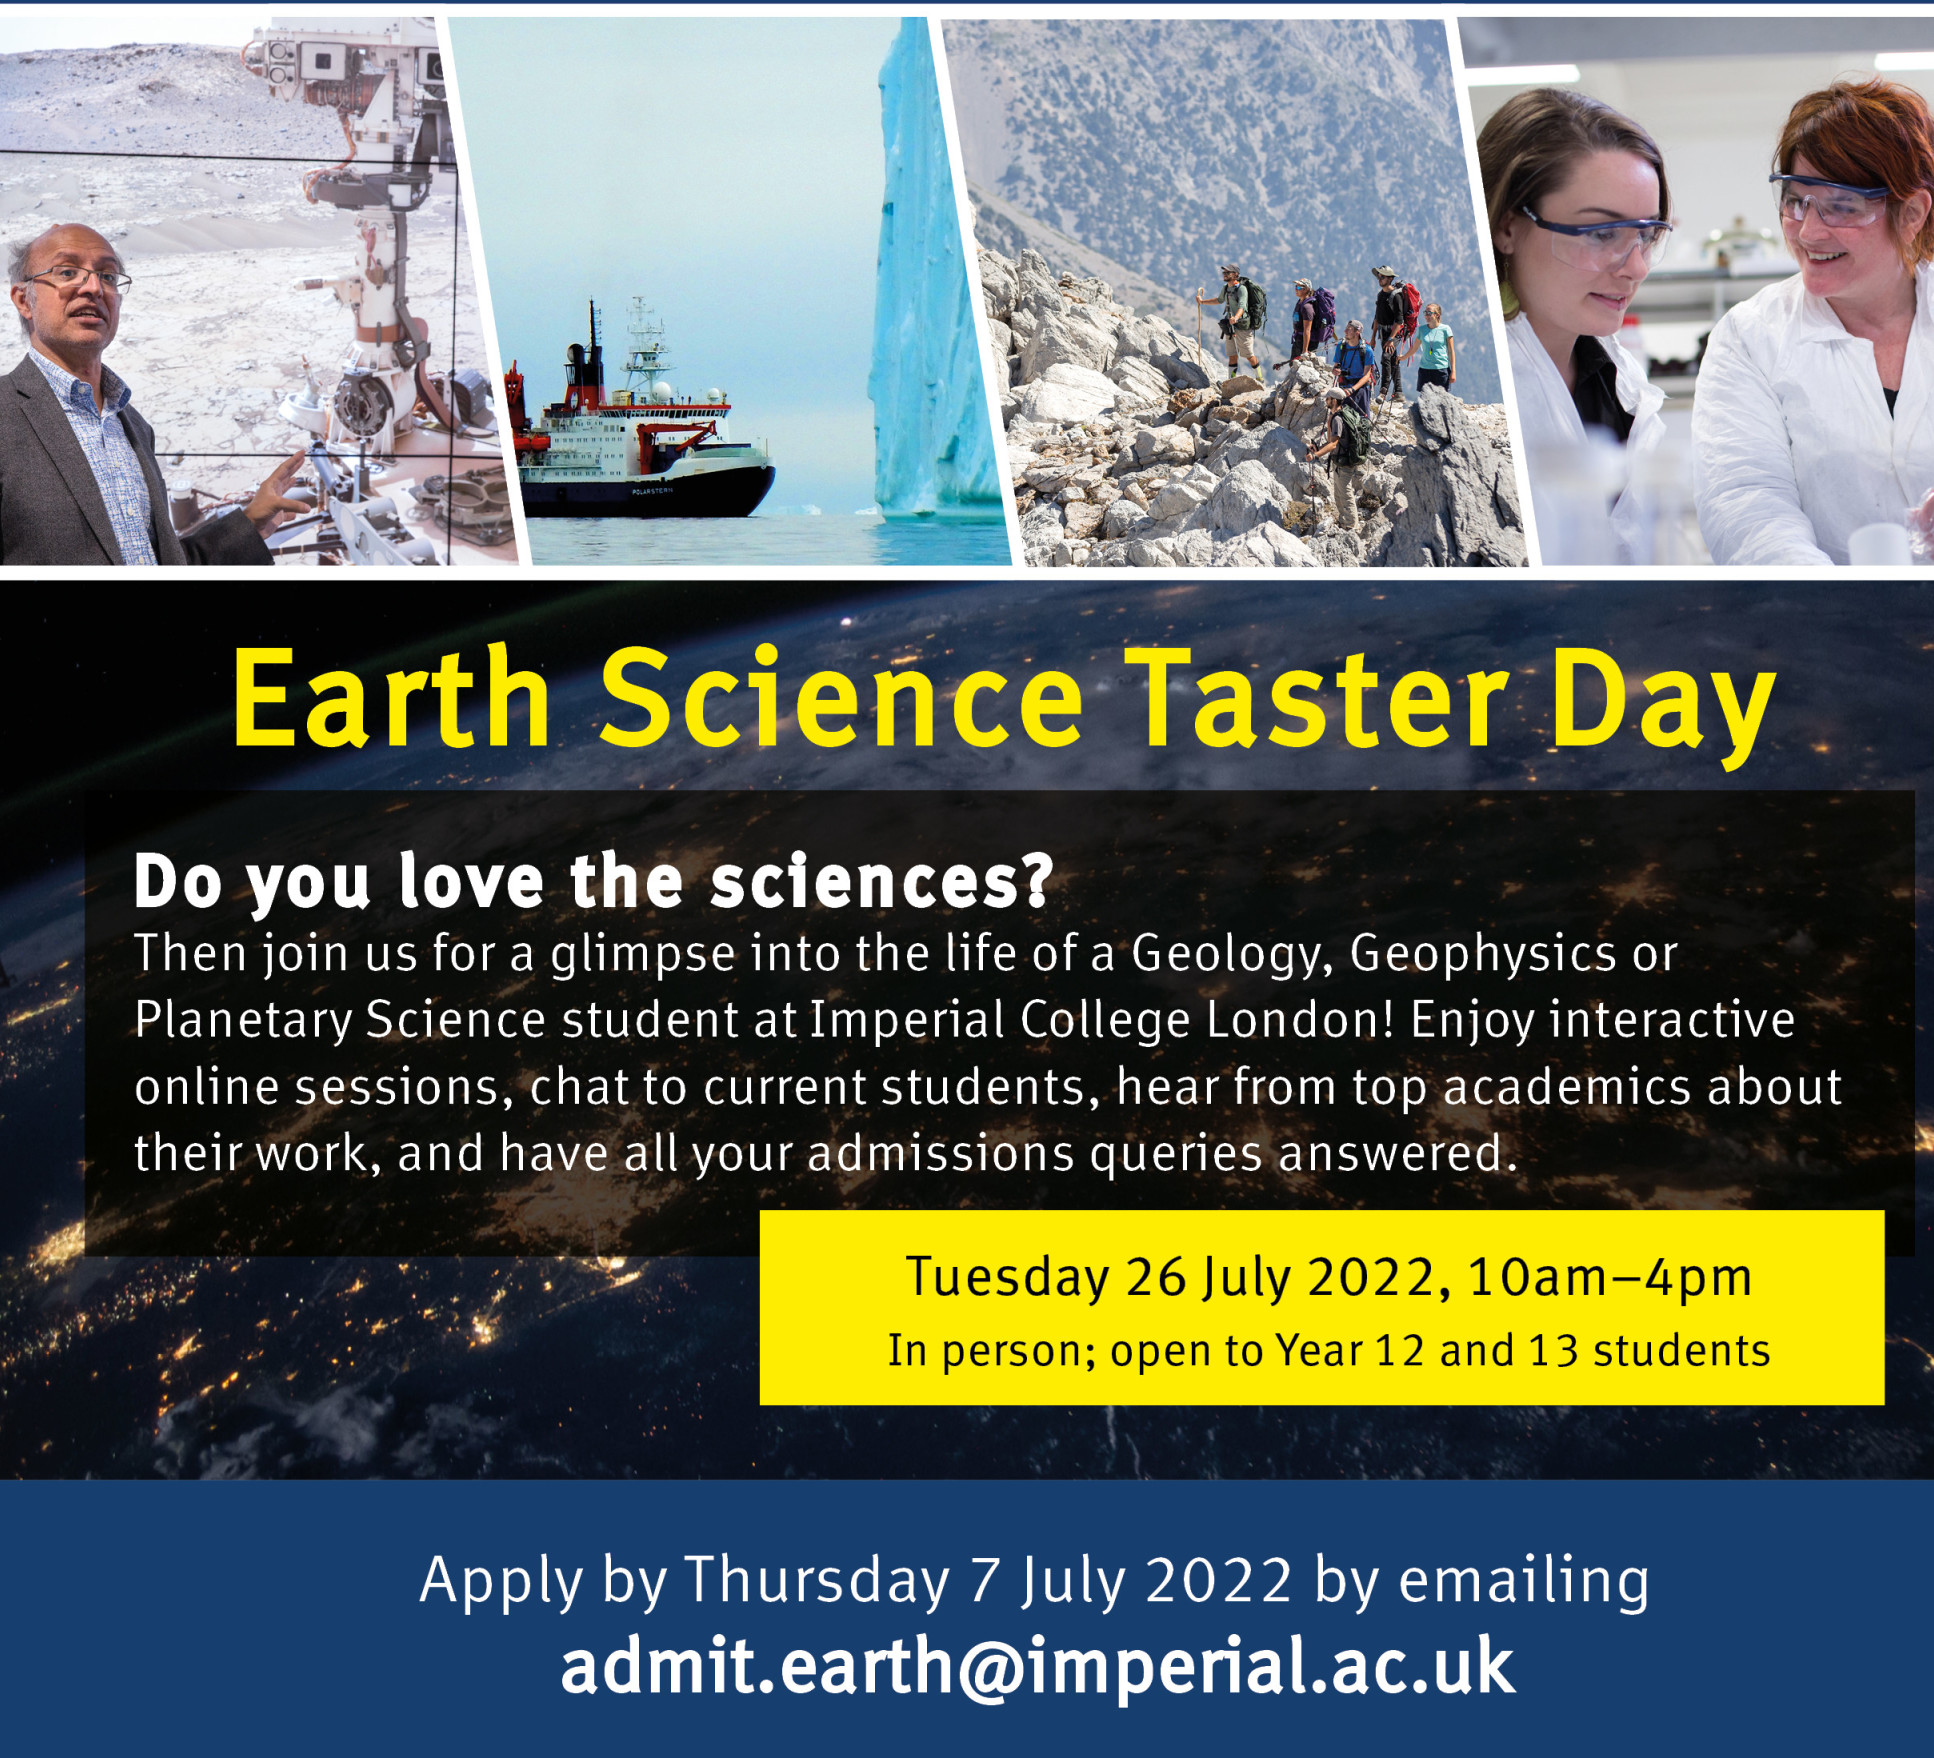 Earth Science Taster Day poster - do you love the sciences?